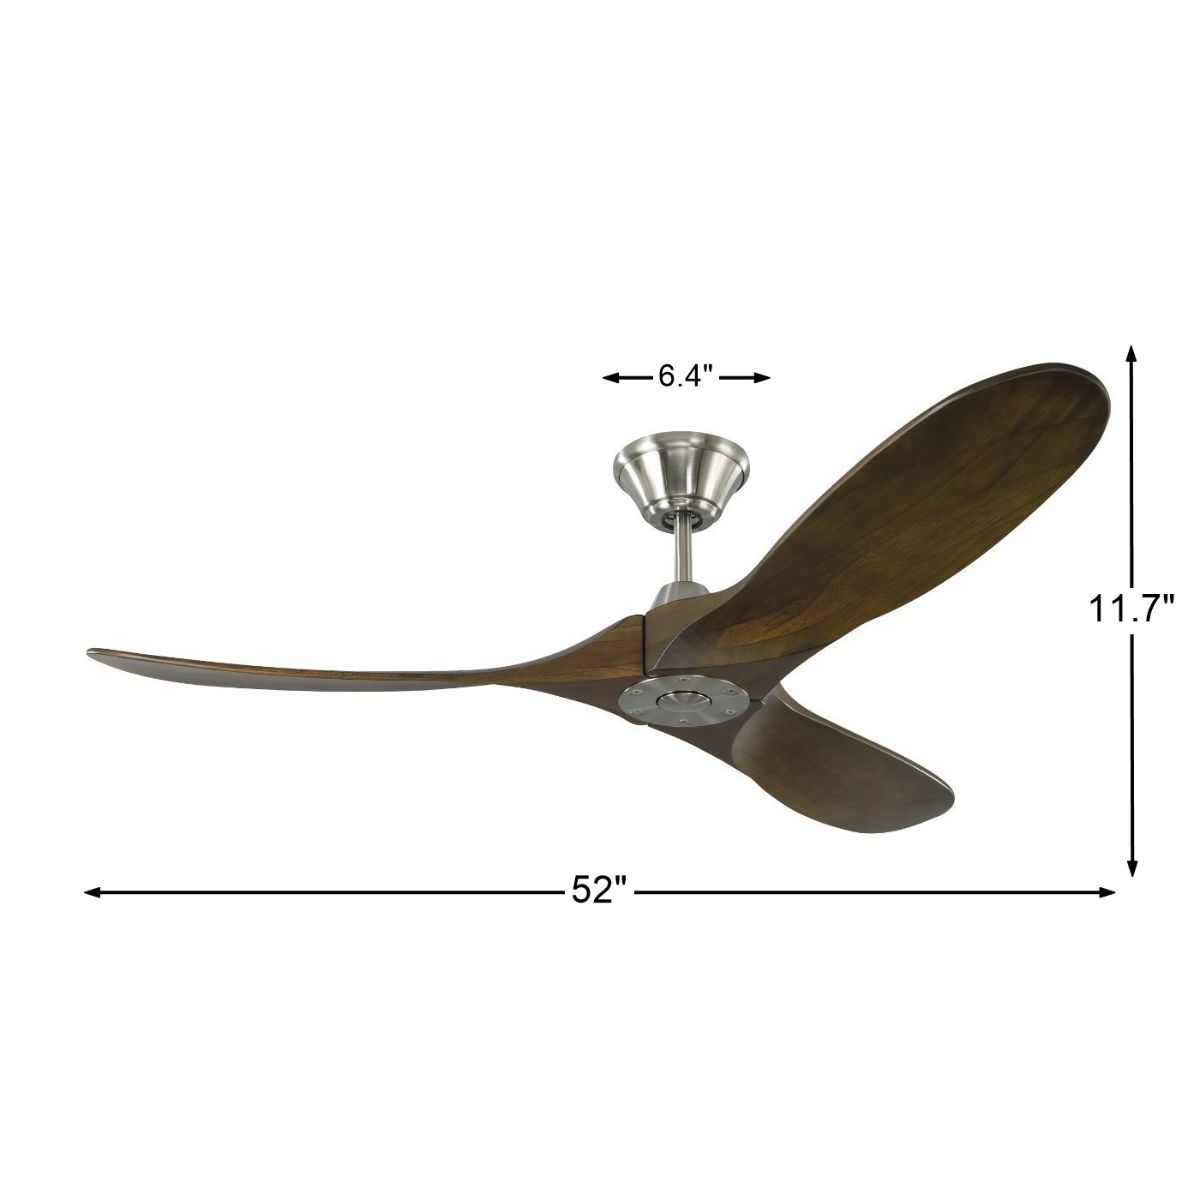 Maverick II 52 Inch Propeller Outdoor Ceiling Fan With Remote